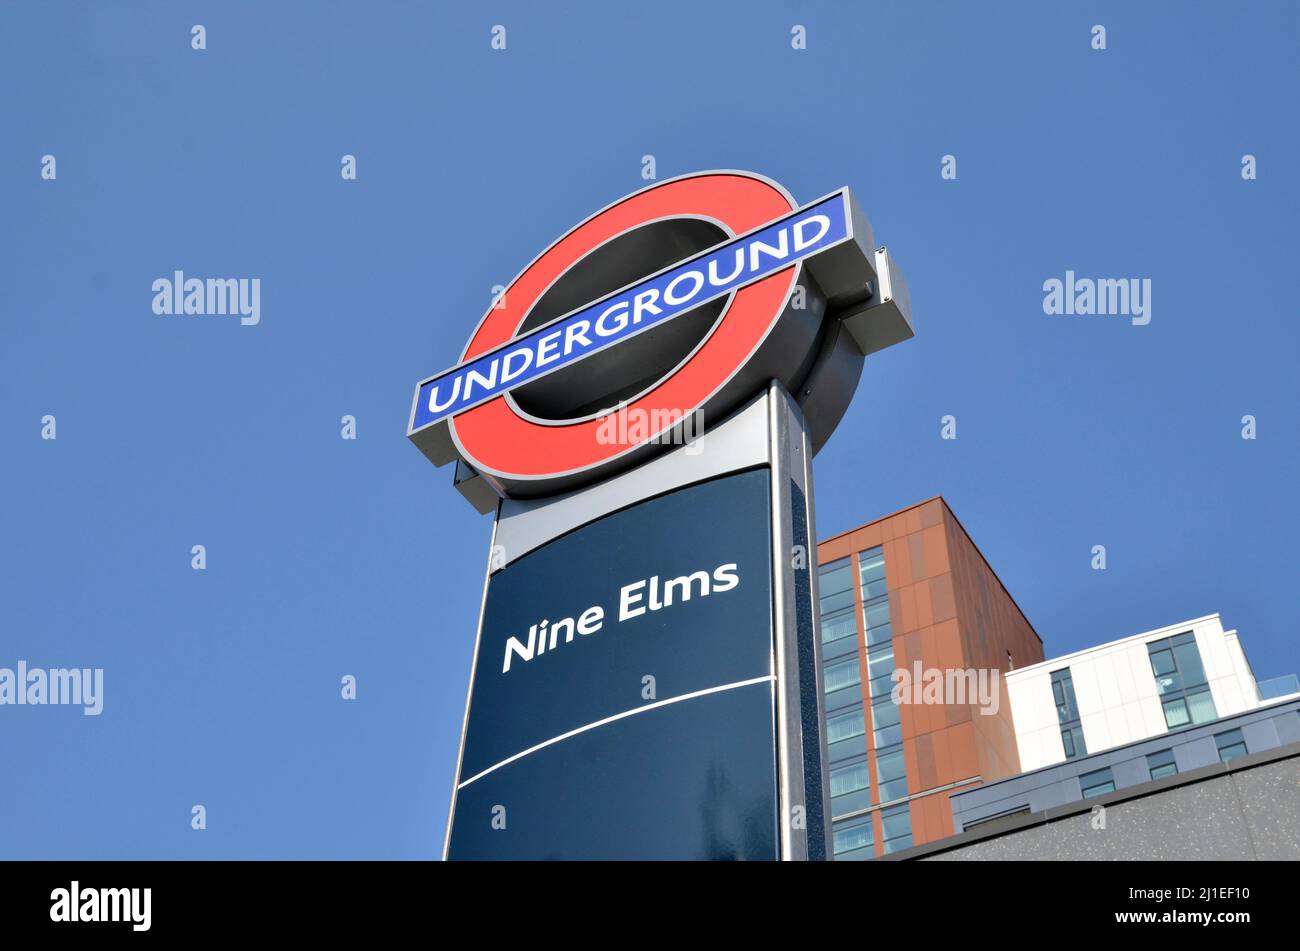 The new Nine Elms Underground Station in South London, part of the Northern Line extension to Battersea Stock Photo